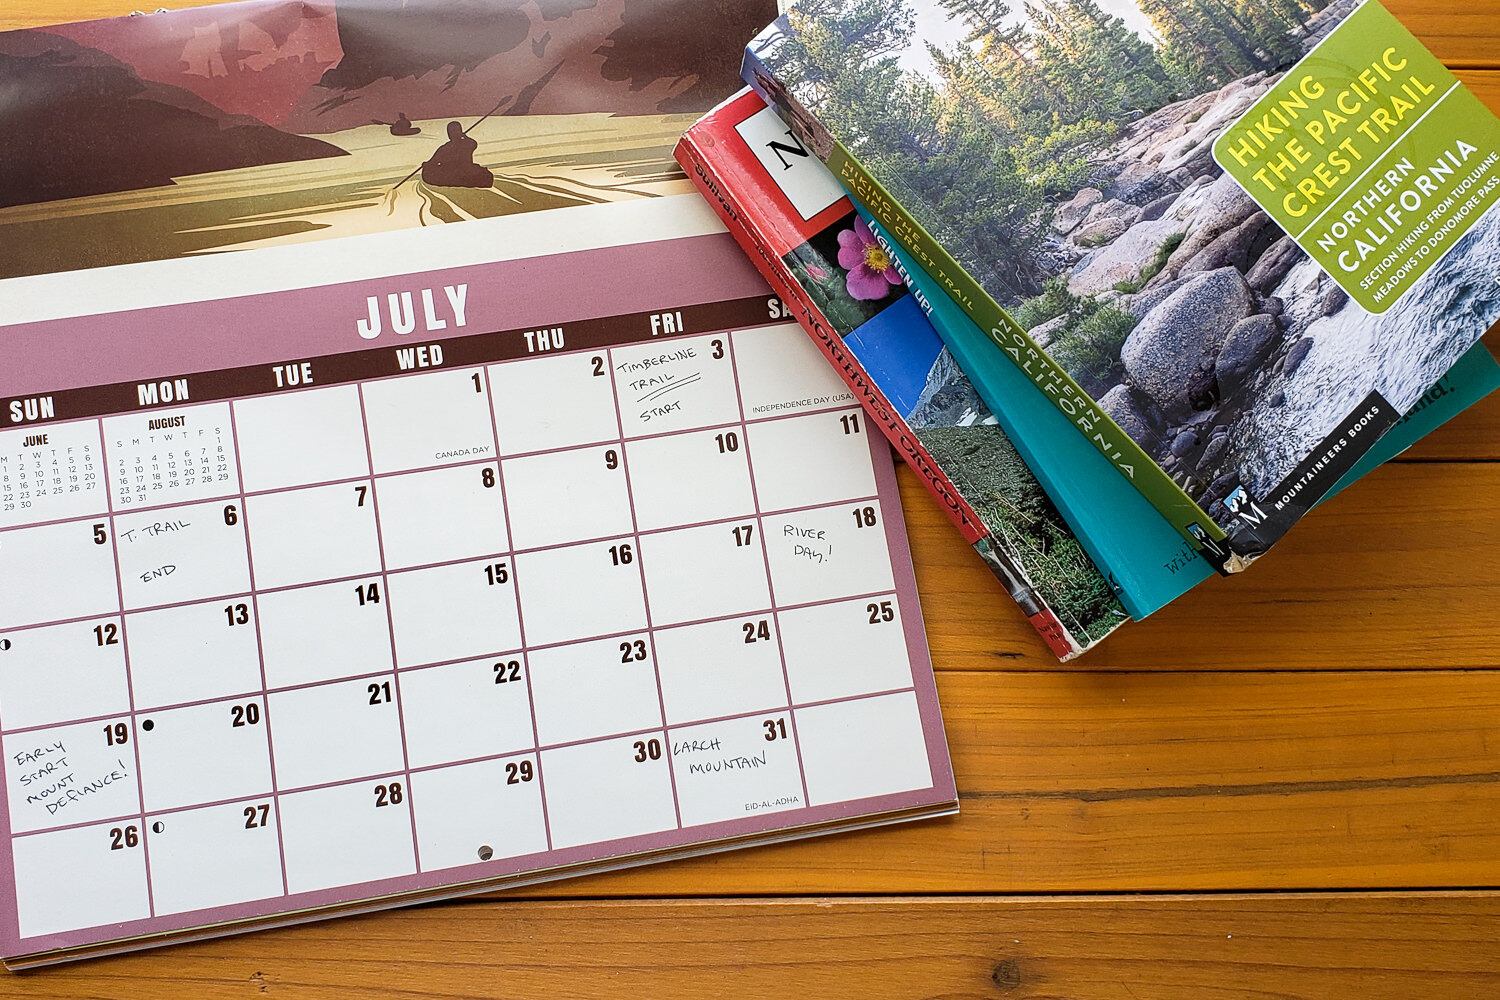 pencil in several challenging hikes or backpacking trips on your calendar throughout the year to stay active